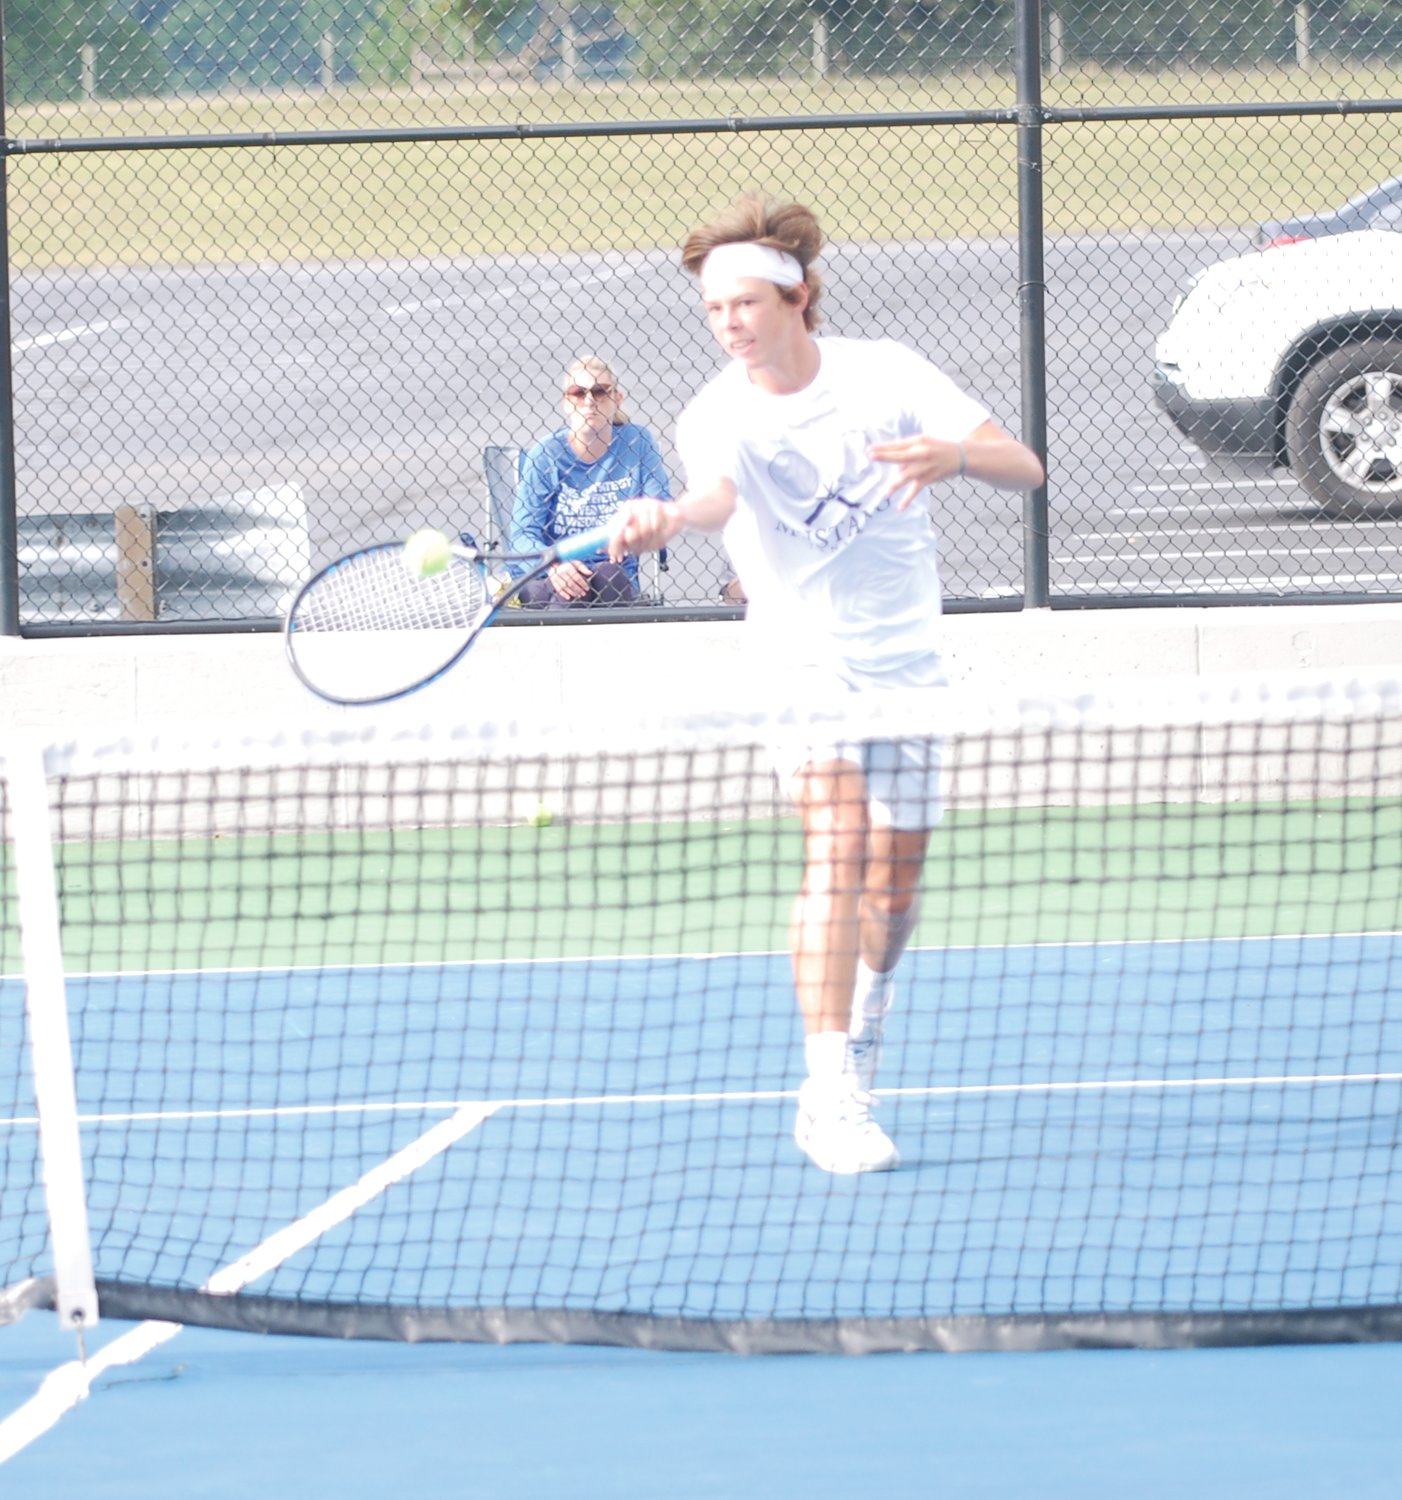 Fountain Central's Cody Linville earned a 6-0, 6-0 win over North Montgomery's Hunter Kashon on Monday at No. 2 singles.